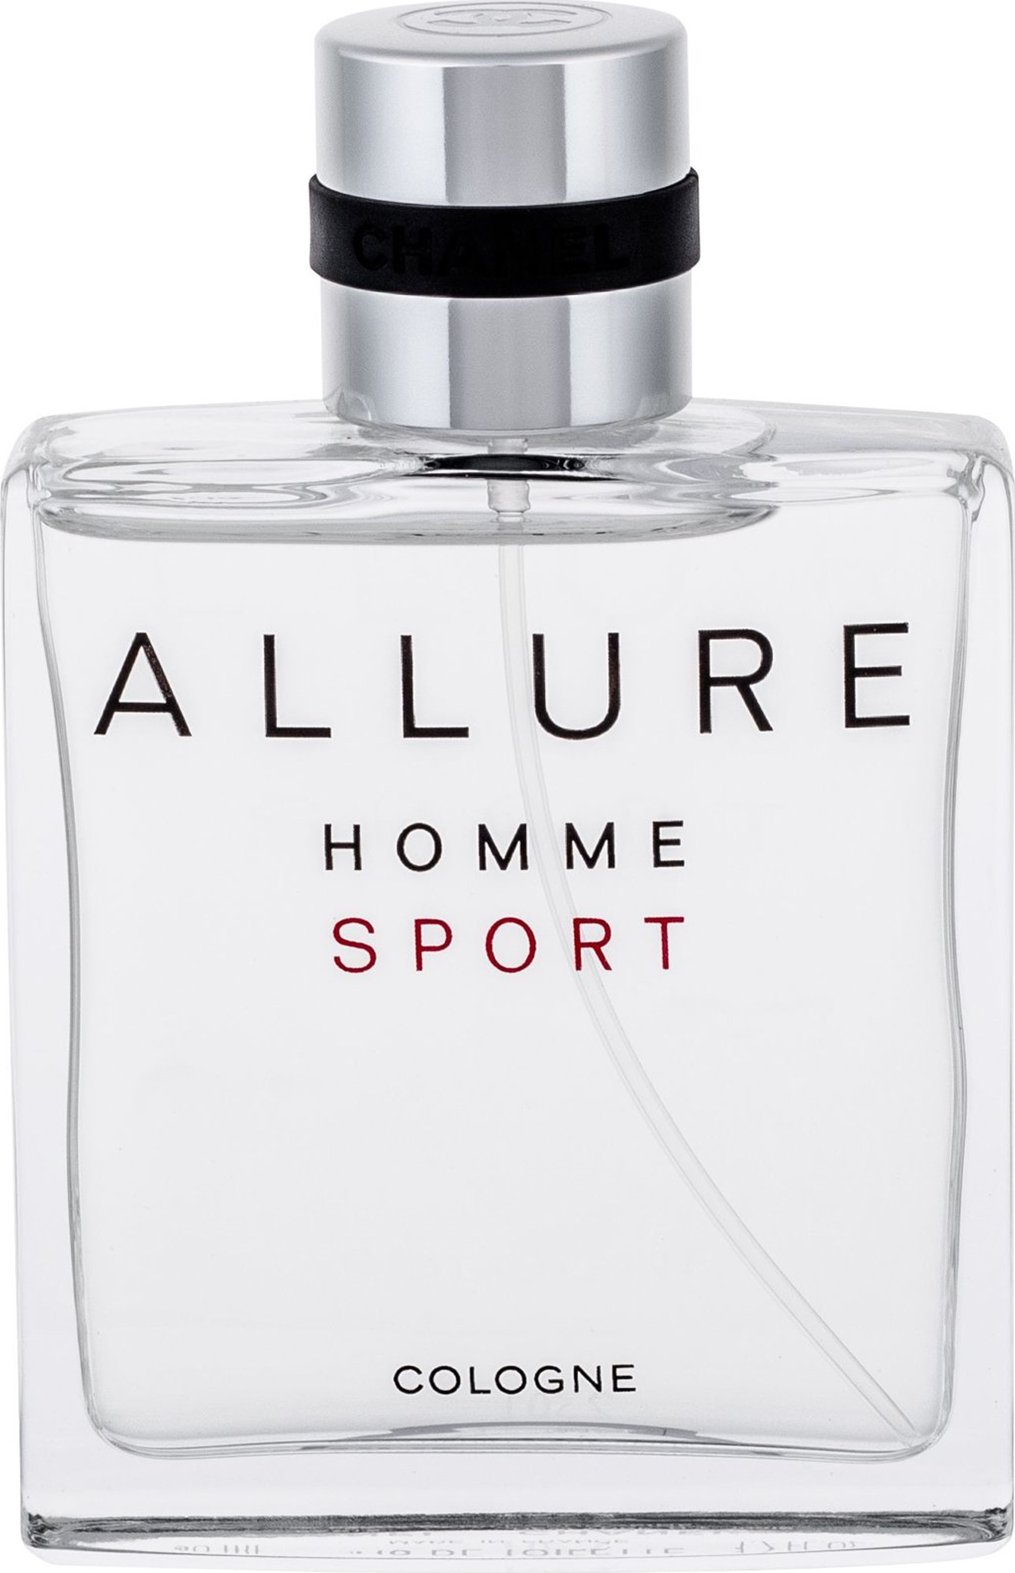 Homme sport cologne. Chanel Allure Sport 100 ml. Chanel Allure homme Sport Cologne 100 ml. Chanel Allure homme Sport 50ml. Chanel Allure Sport Cologne 50ml.